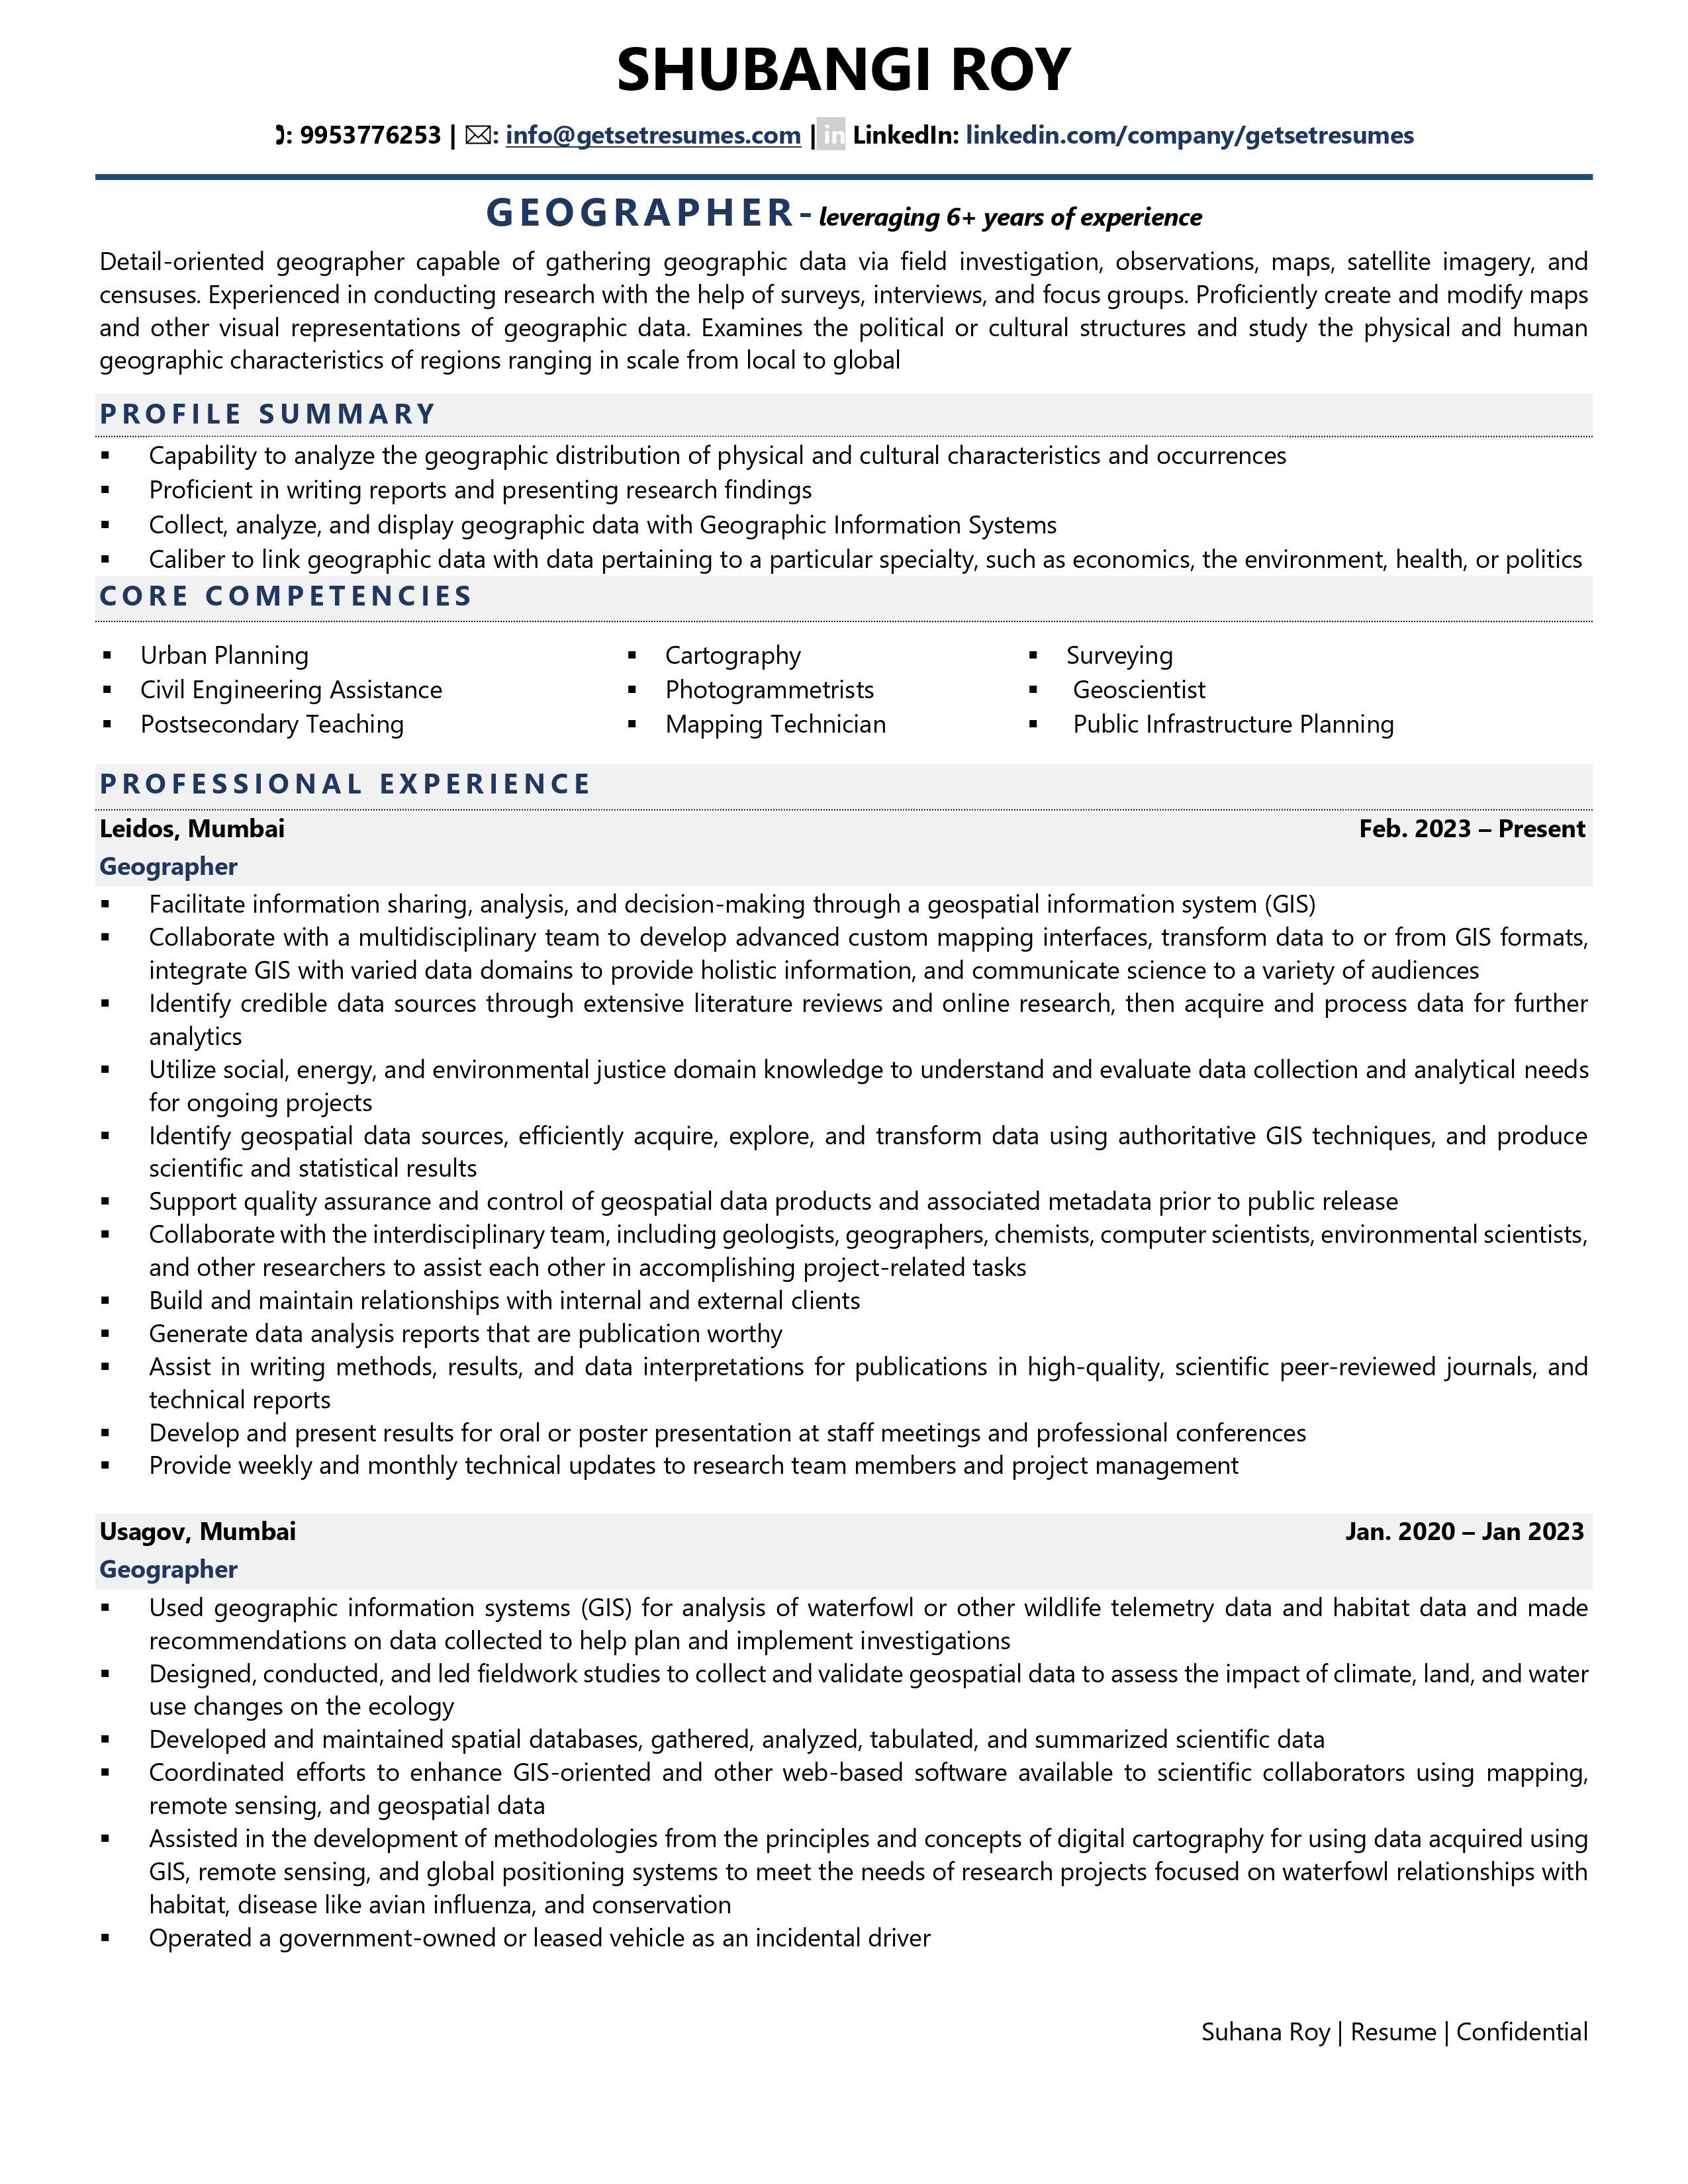 Geographer - Resume Example & Template